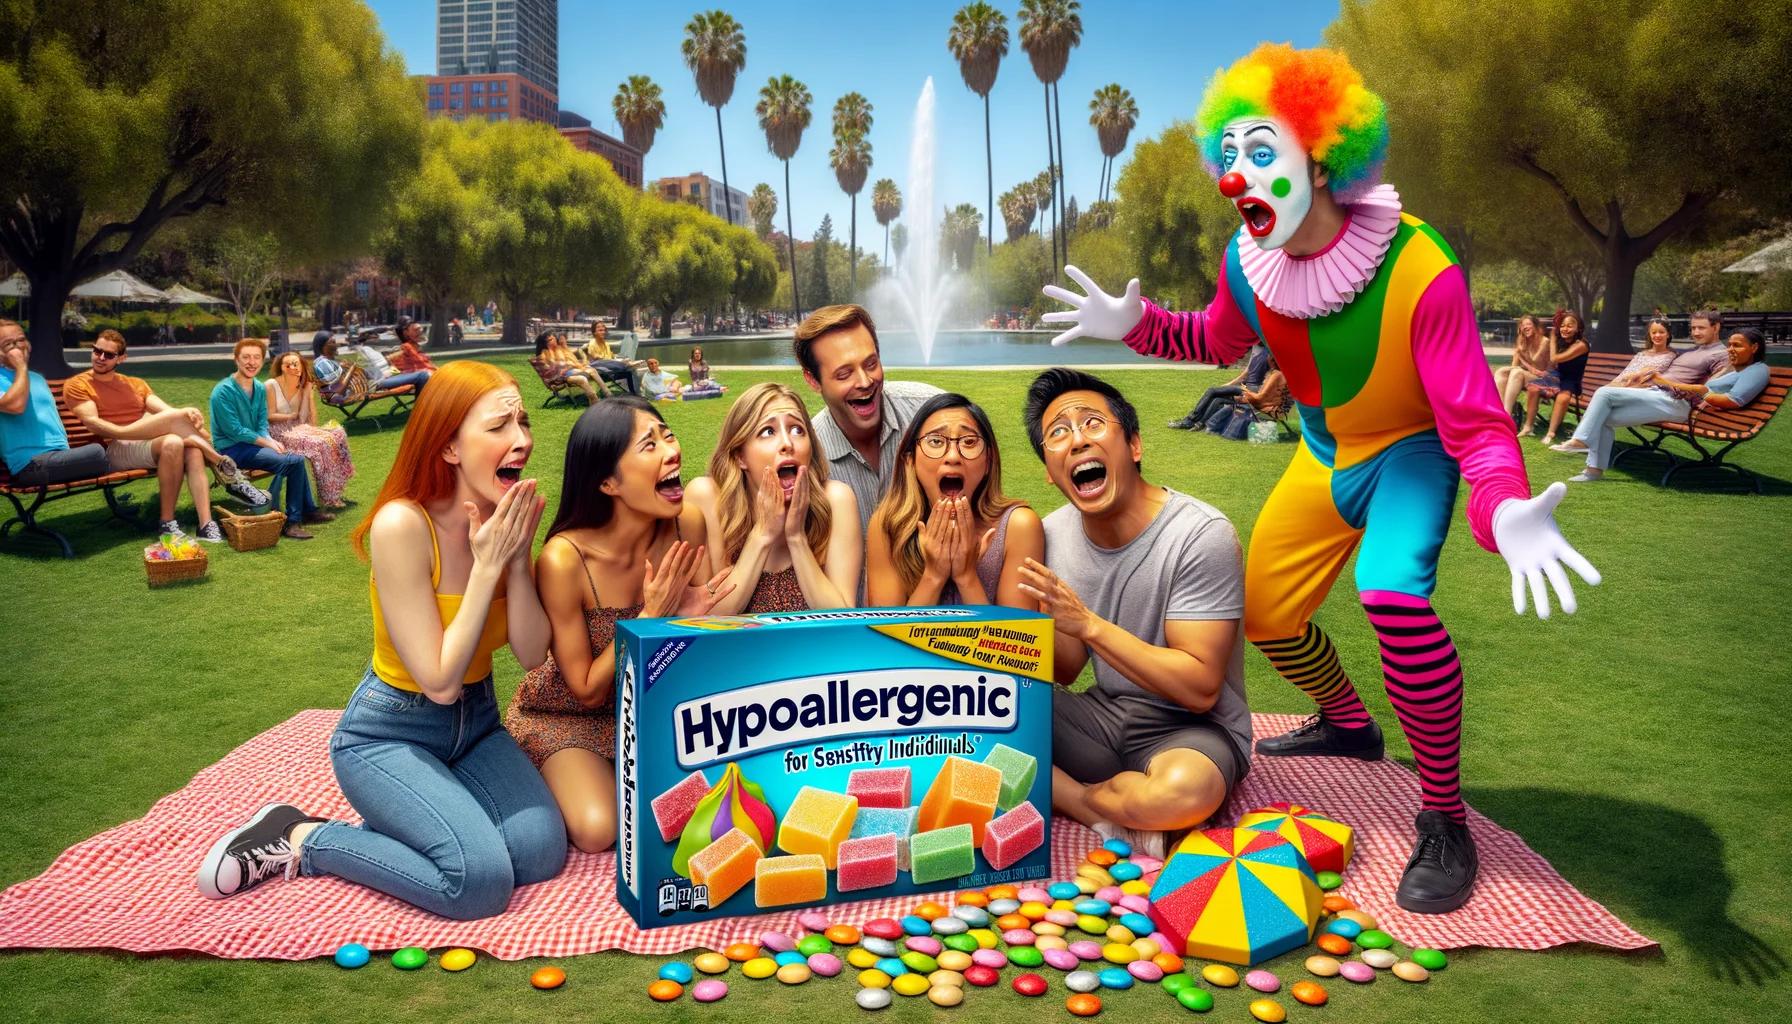 Visualize a humorous scene involving hypoallergenic candies specially designed for sensitive individuals. Imagine a setting of an outdoor picnic on a bright, sunny day at a local park. A diverse group of friends, a Caucasian woman, and an Asian man, are excitedly unboxing their candy, which comes in a flamboyant, oversized package labeled 'Hypoallergenic Candy for Sensitive Individuals'. The candies are in vibrant, quirky shapes like octagons and triangles, unintentionally sparking laughter from the spectators in the park. Beside them, a street mime dressed in vibrant colors pretends to be dramatically 'choked' upon pretending to eat a candy, causing everyone in the vicinity to erupt in laughter.